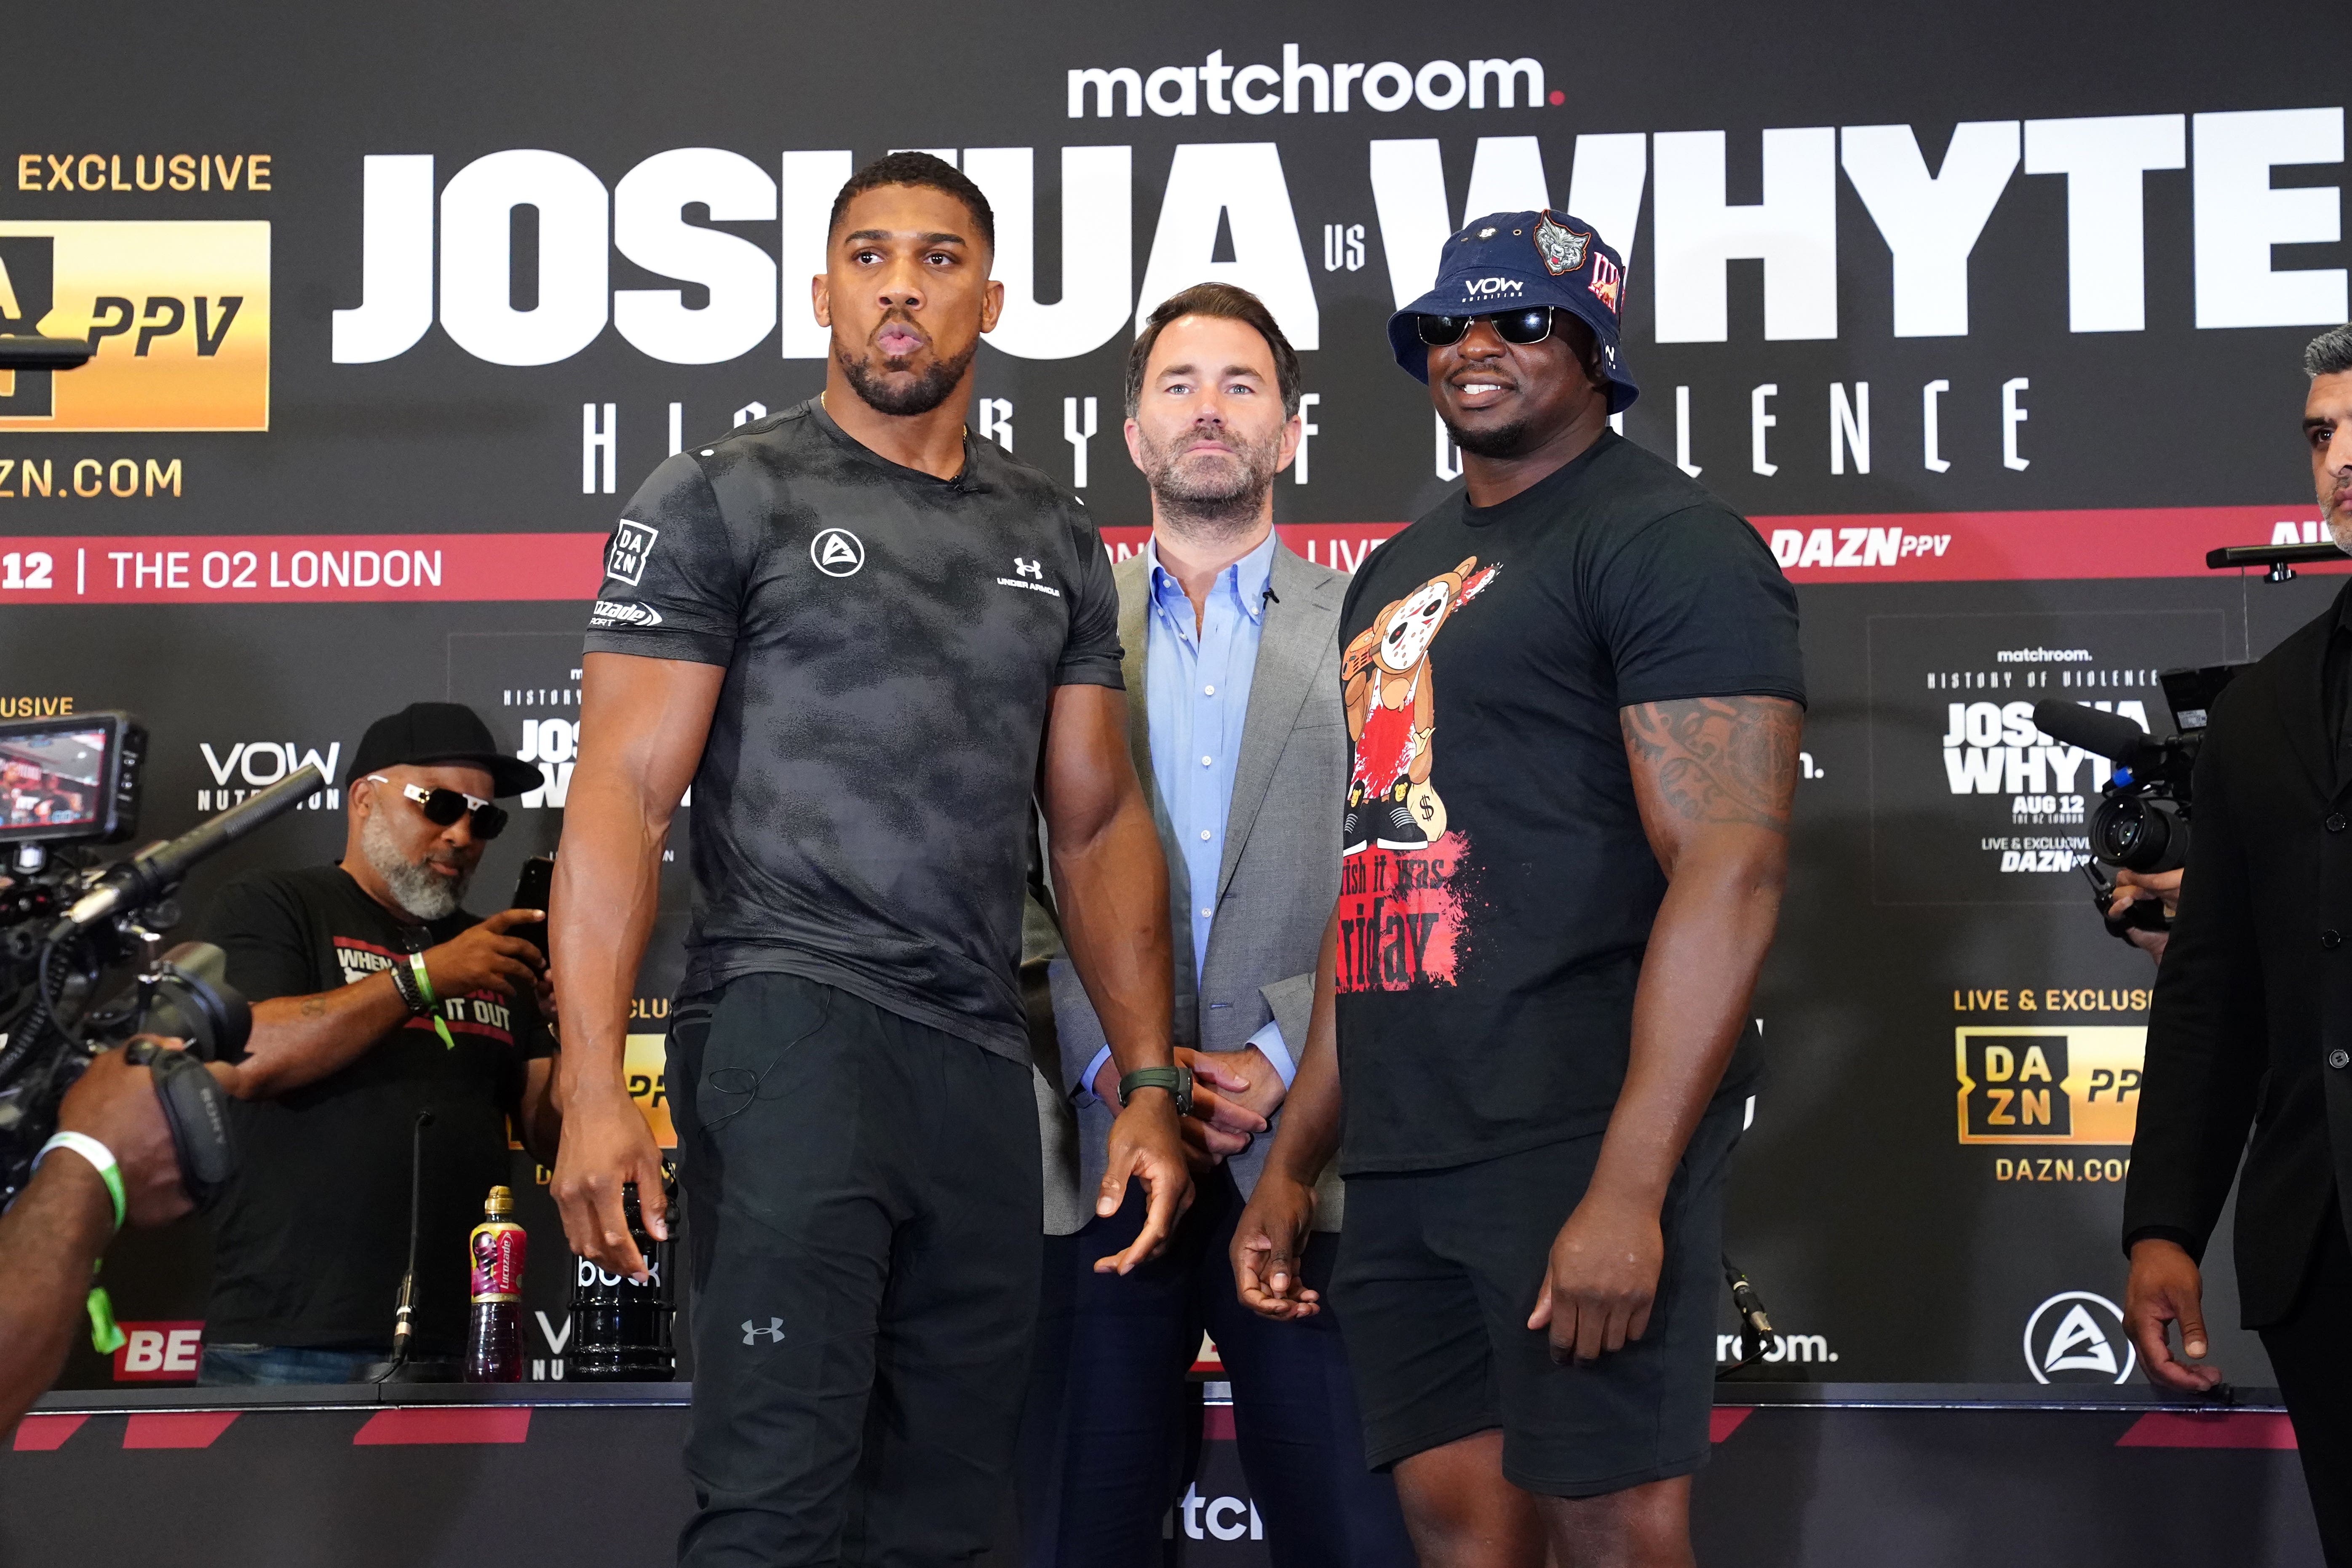 Whyte was scheduled to take on Joshua last year